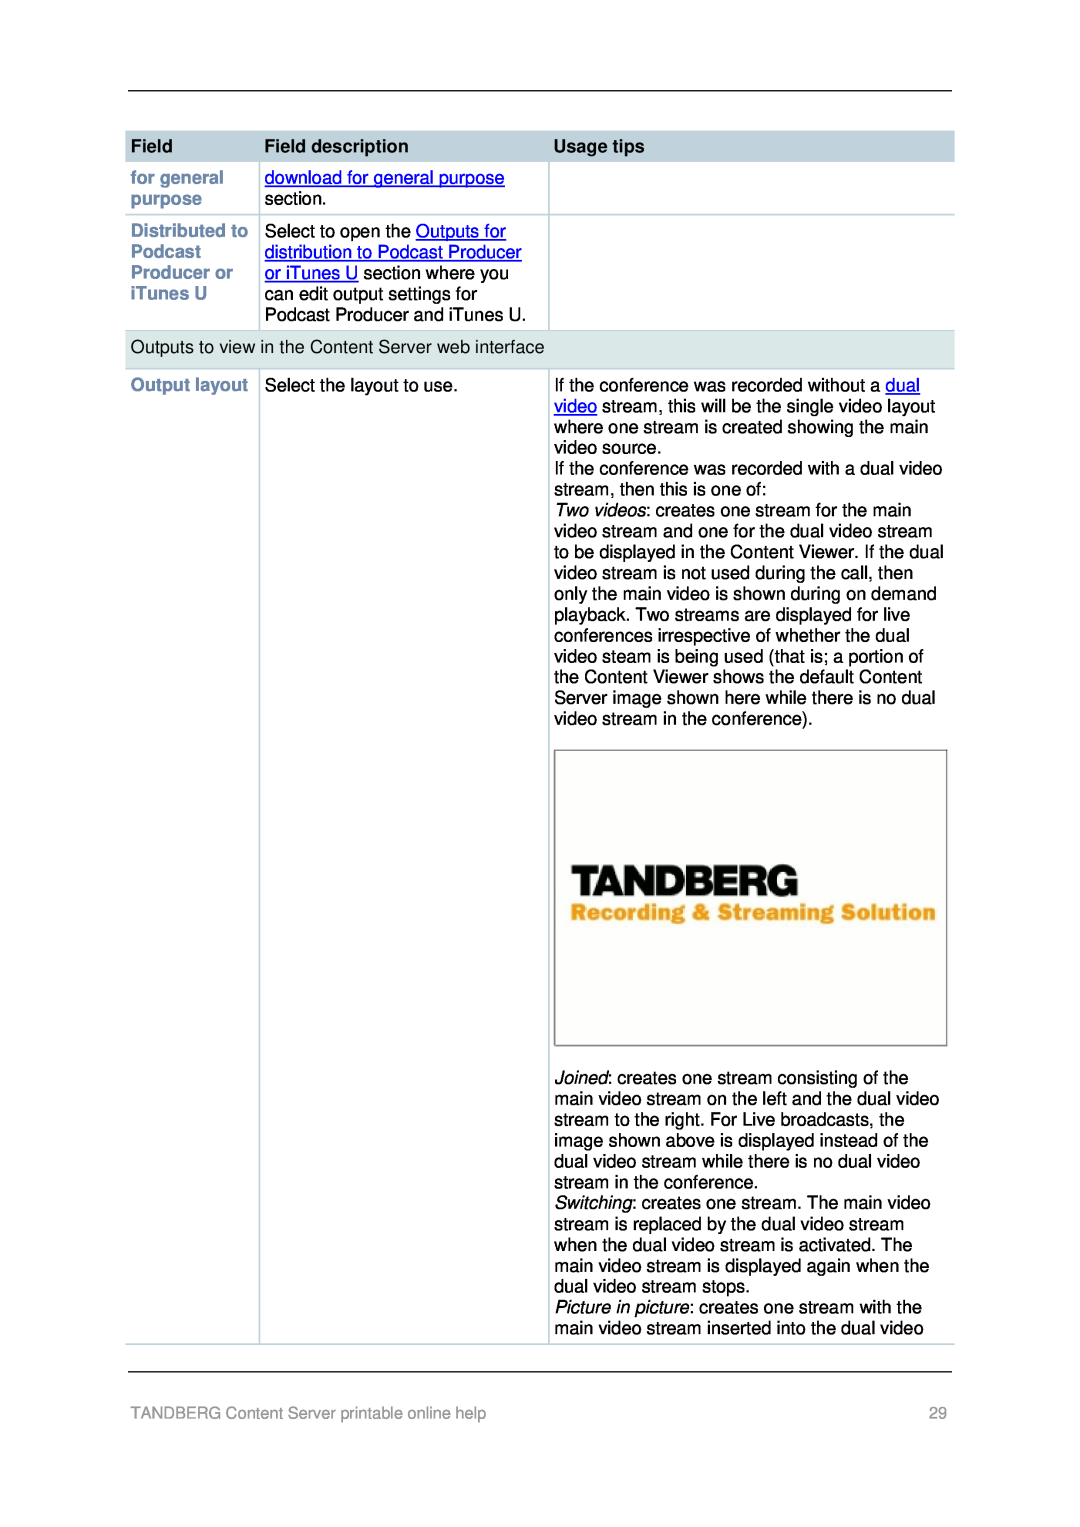 TANDBERG D1459501 manual Field, download for general purpose, distribution to Podcast Producer 